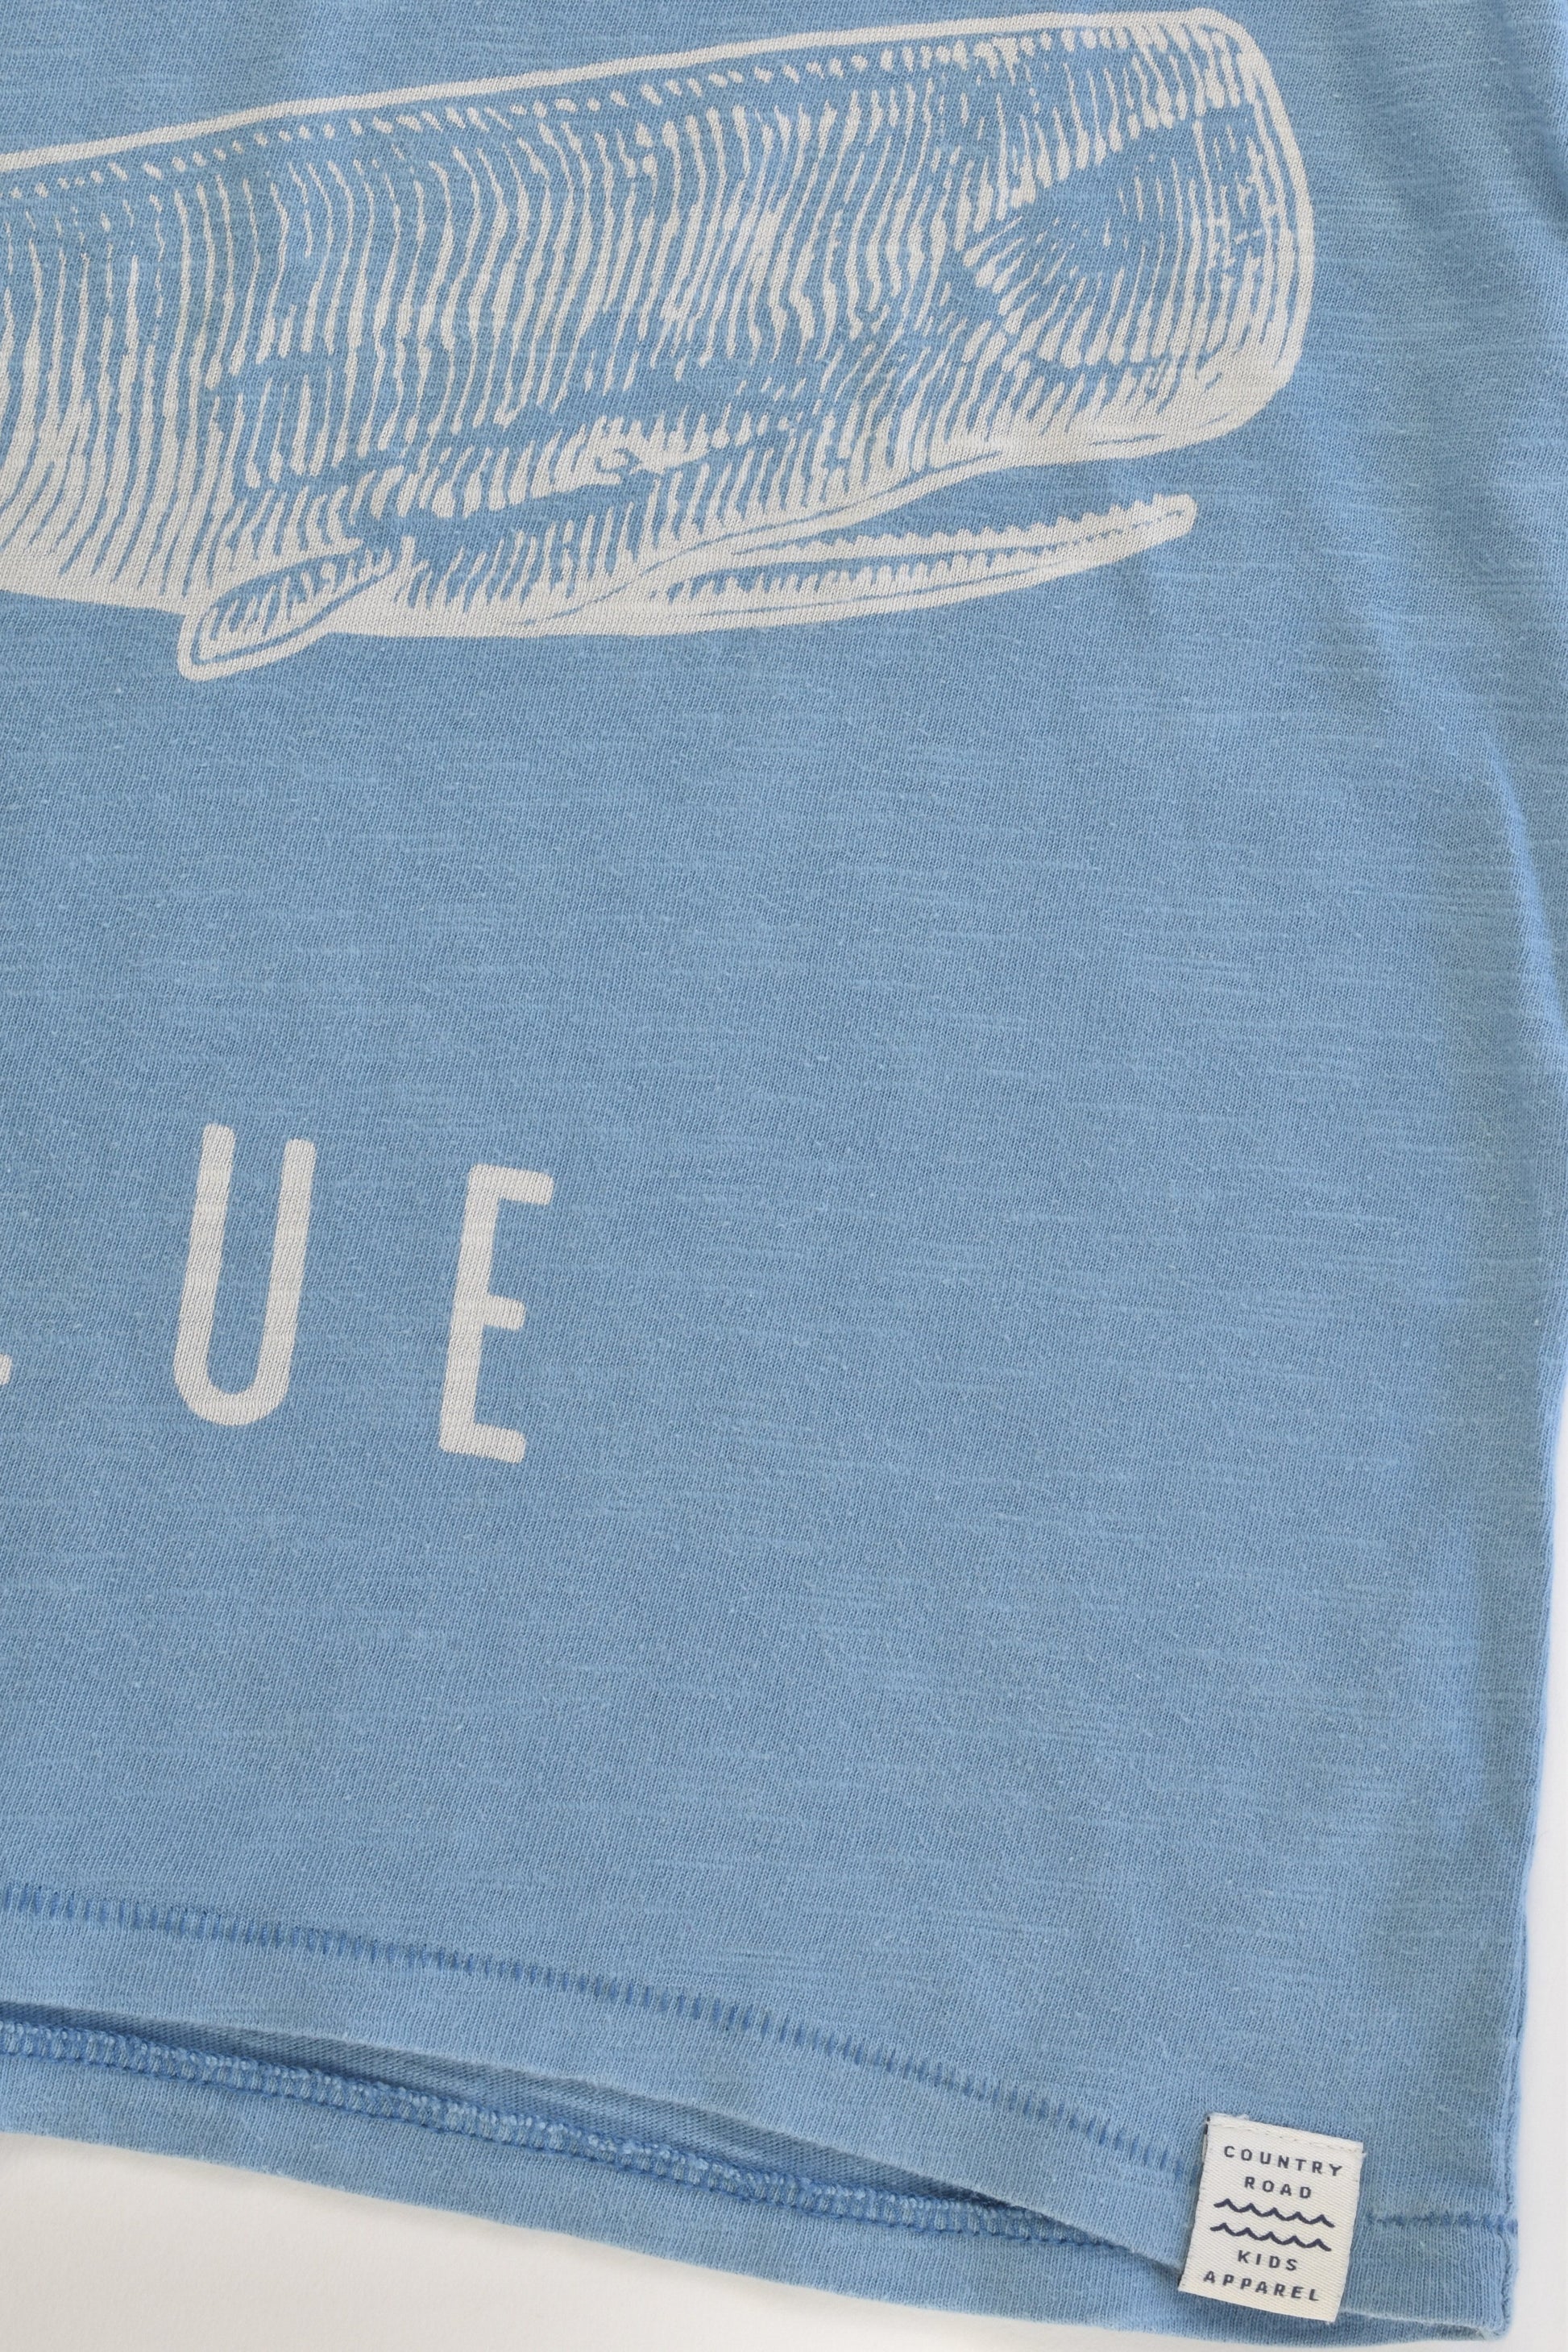 Country Road Size 8 'Big Blue' Whale T-shirt